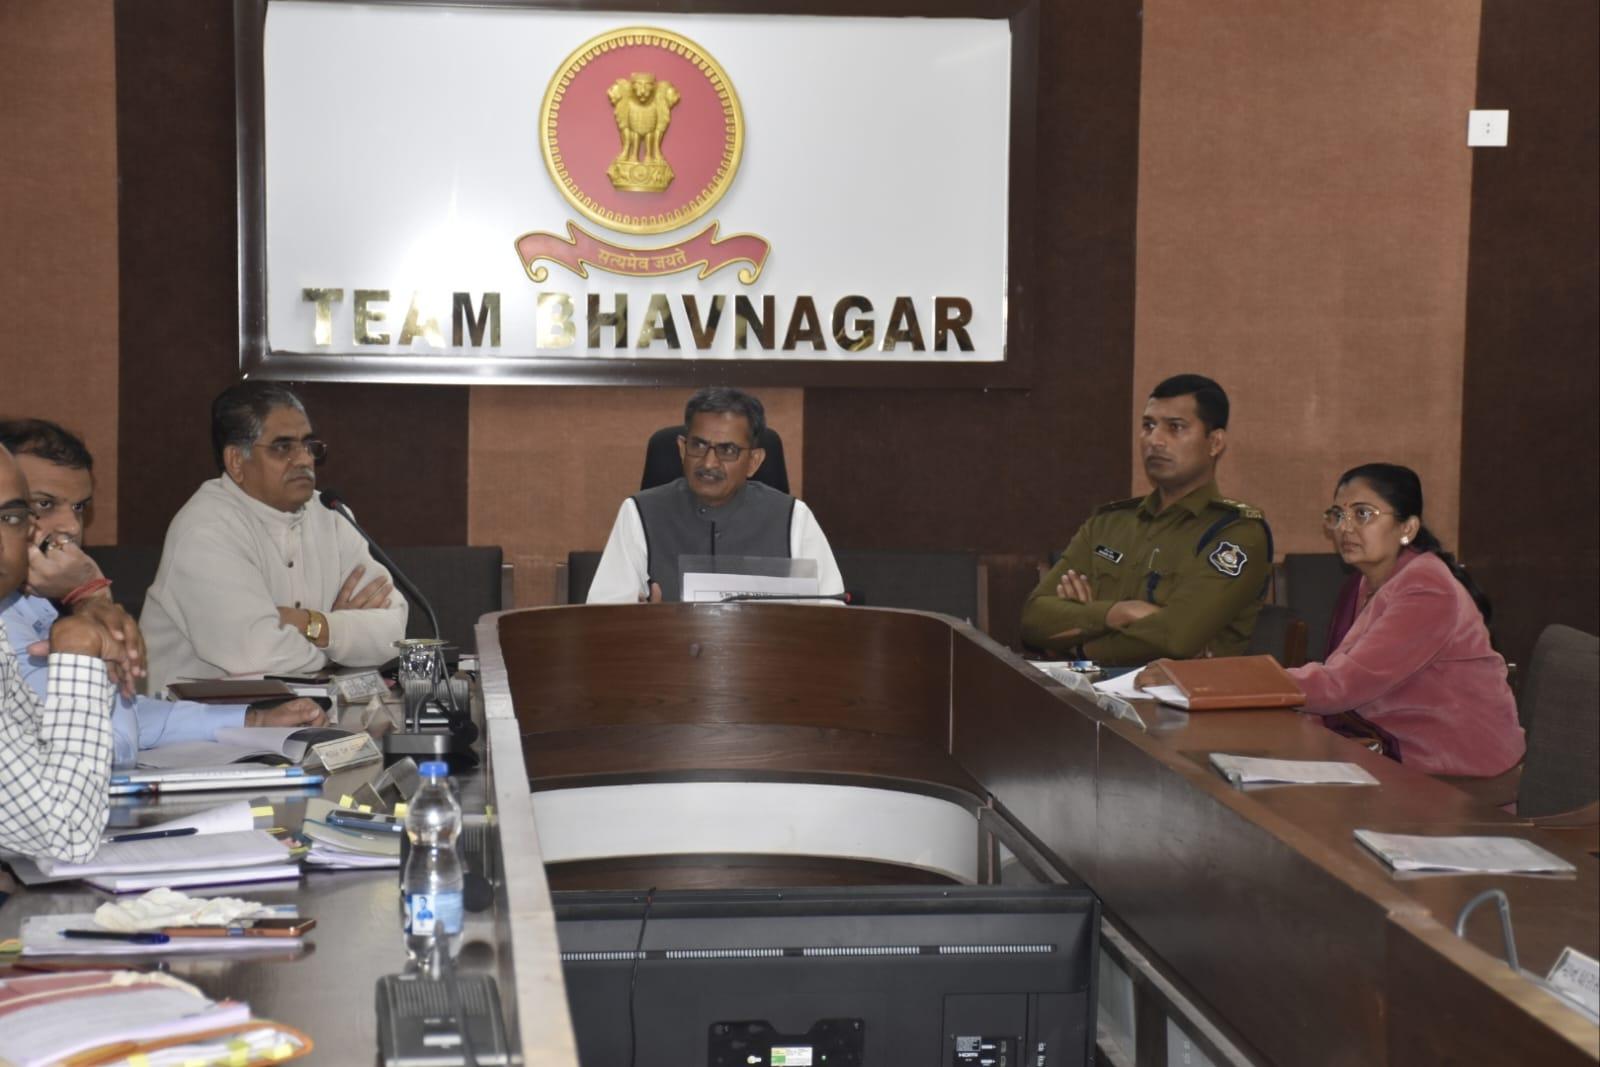 A meeting of Bhavnagar District Coordination and Grievance Committee was held under the chairmanship of the Collector